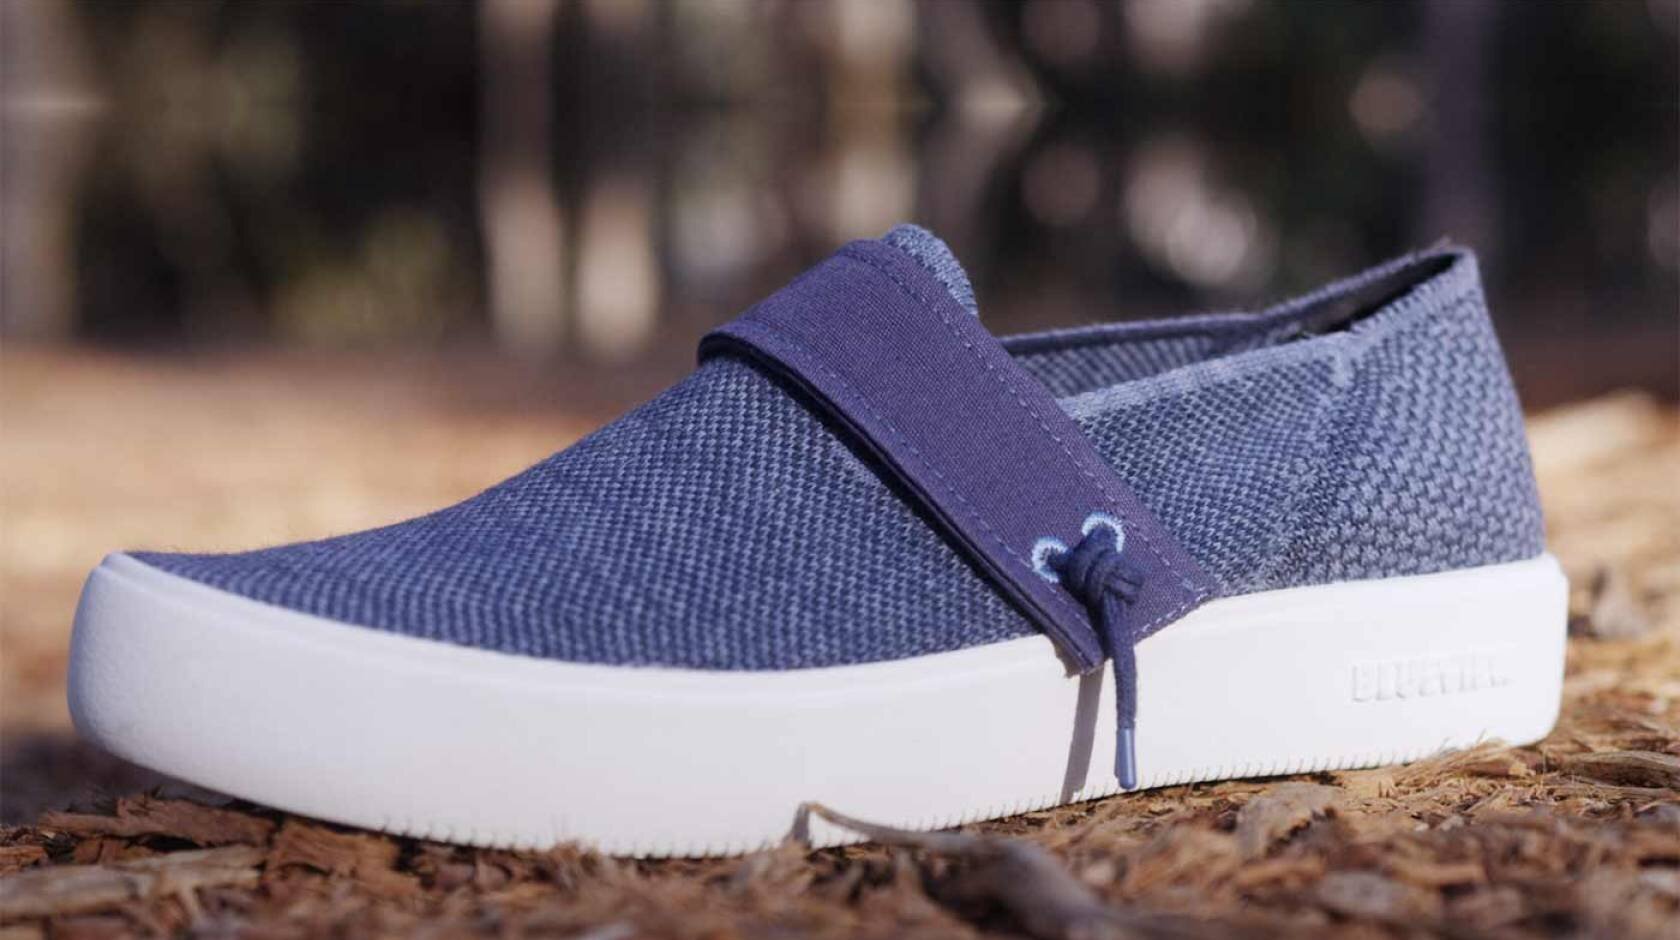 Sustainable sneakers: Scientists create the world’s first biodegradable shoe